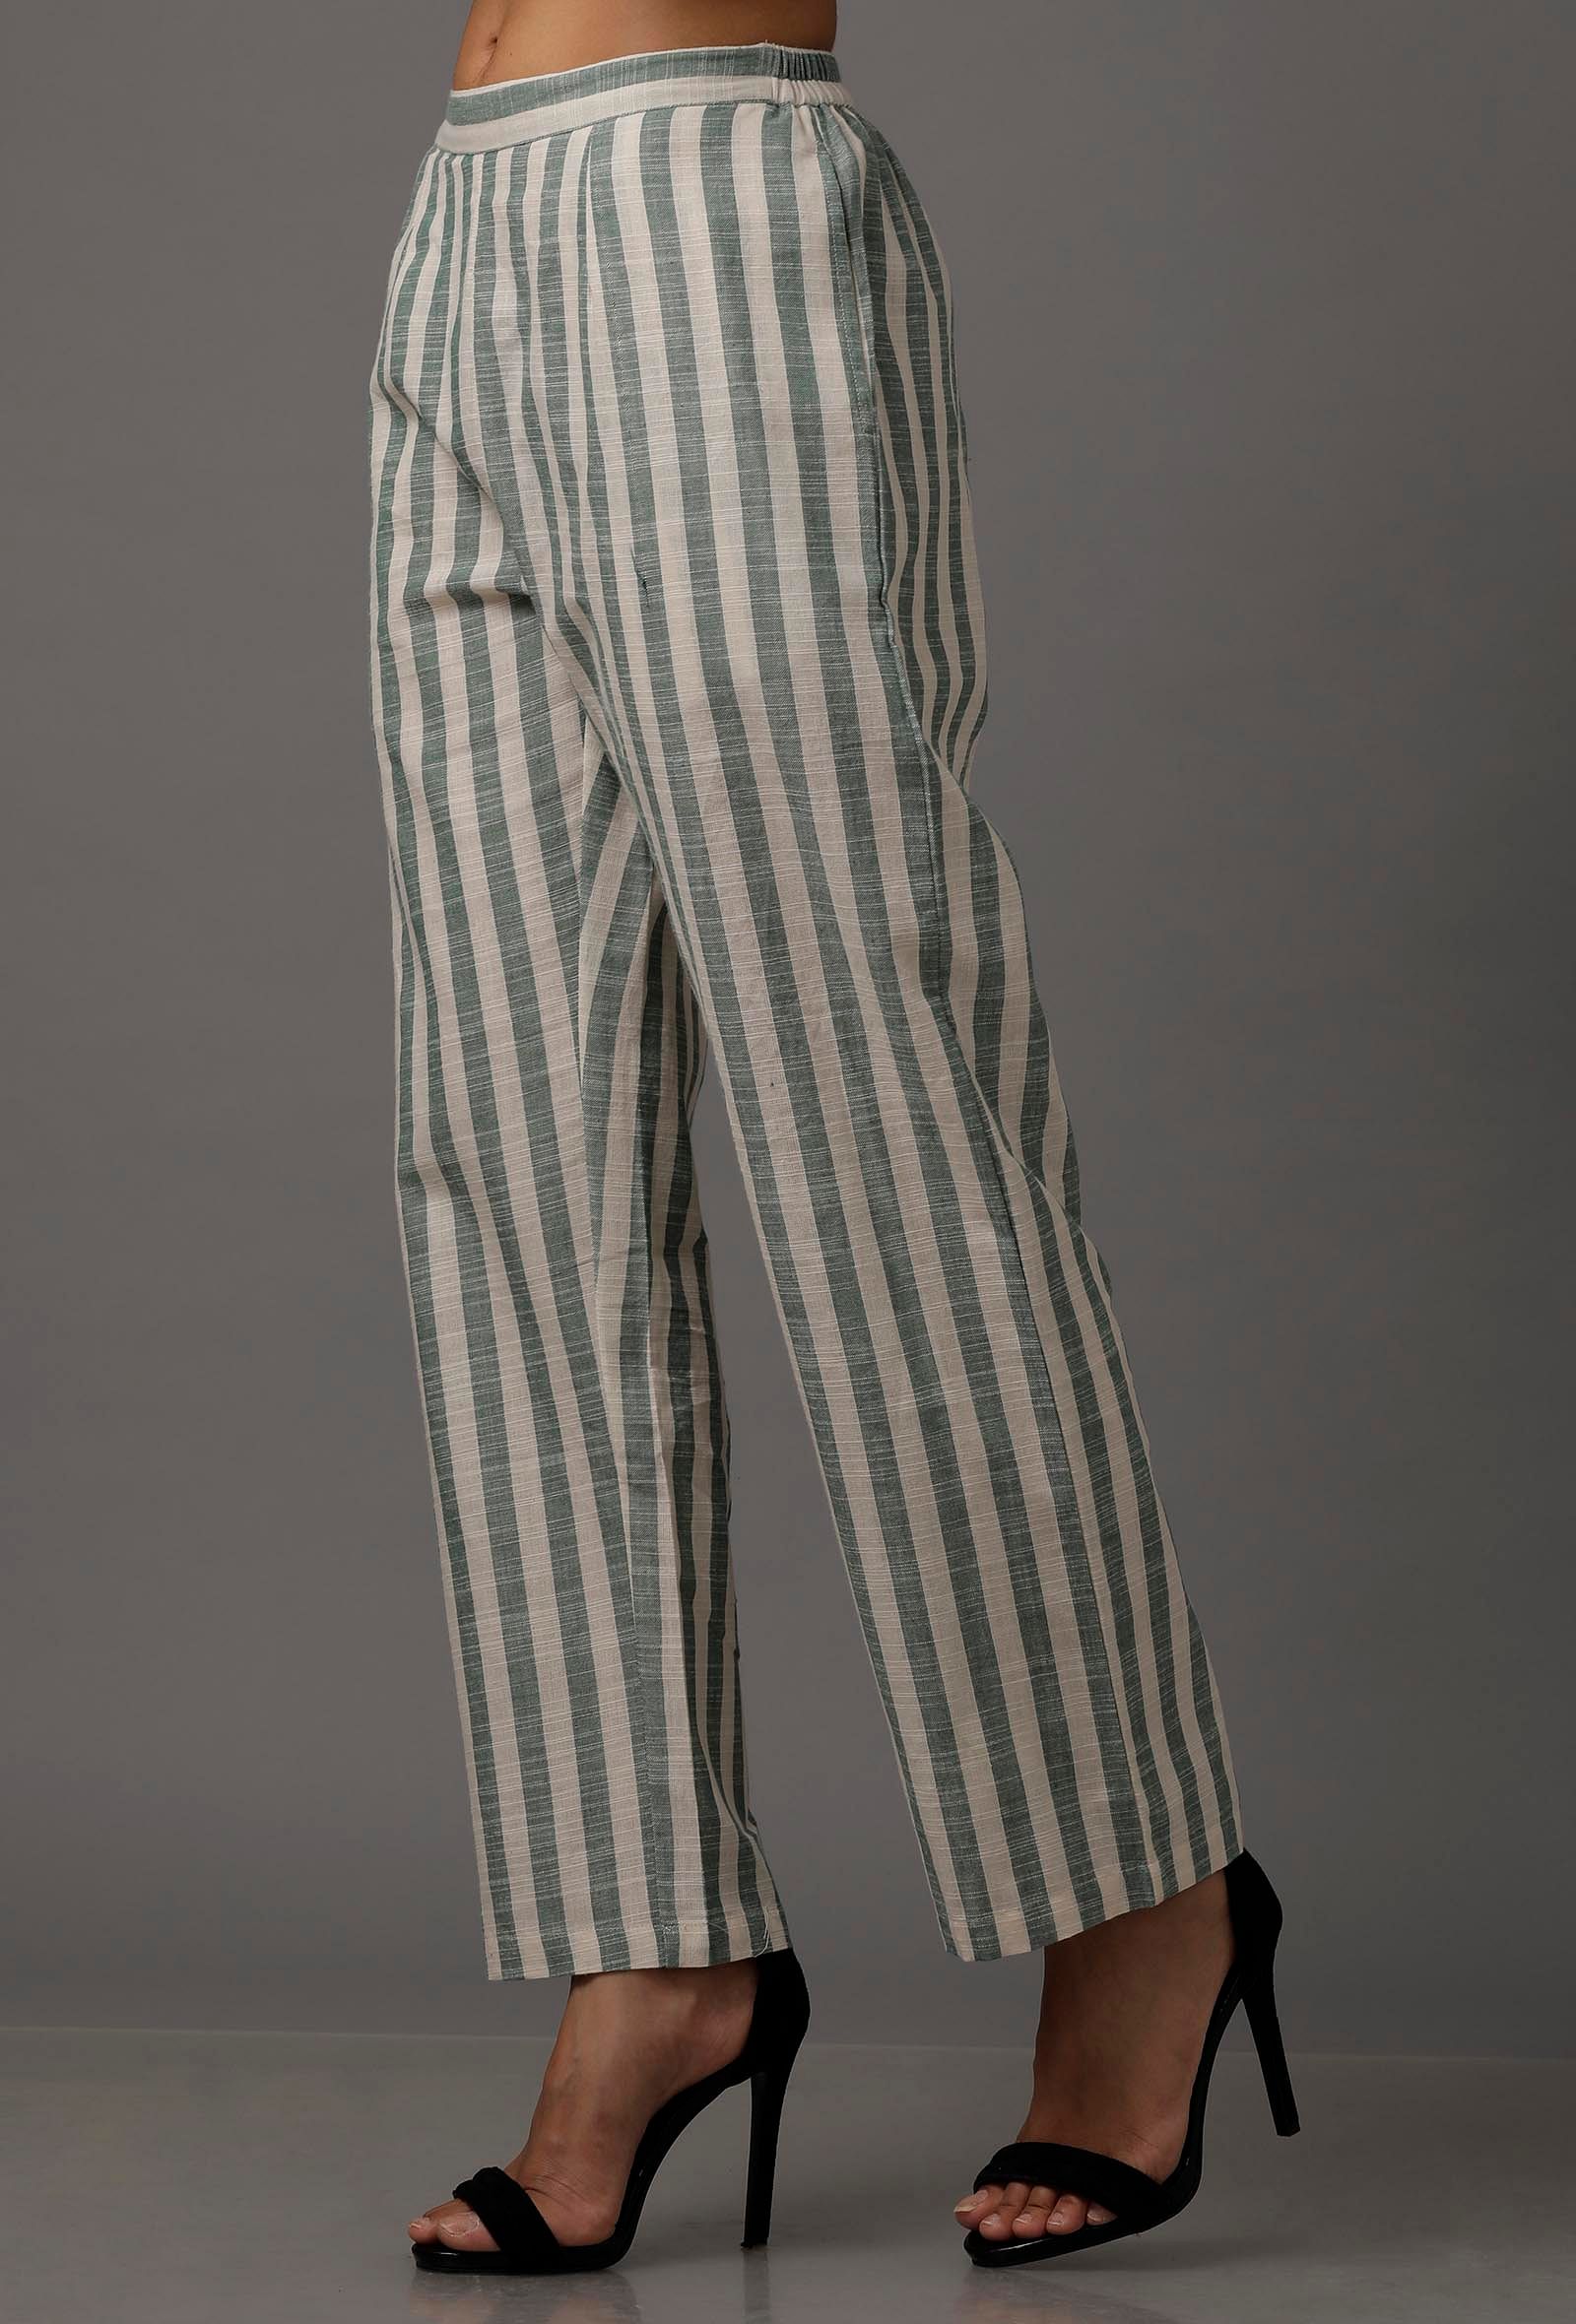 Green and White Stripes Pure Woven Cotton Pants